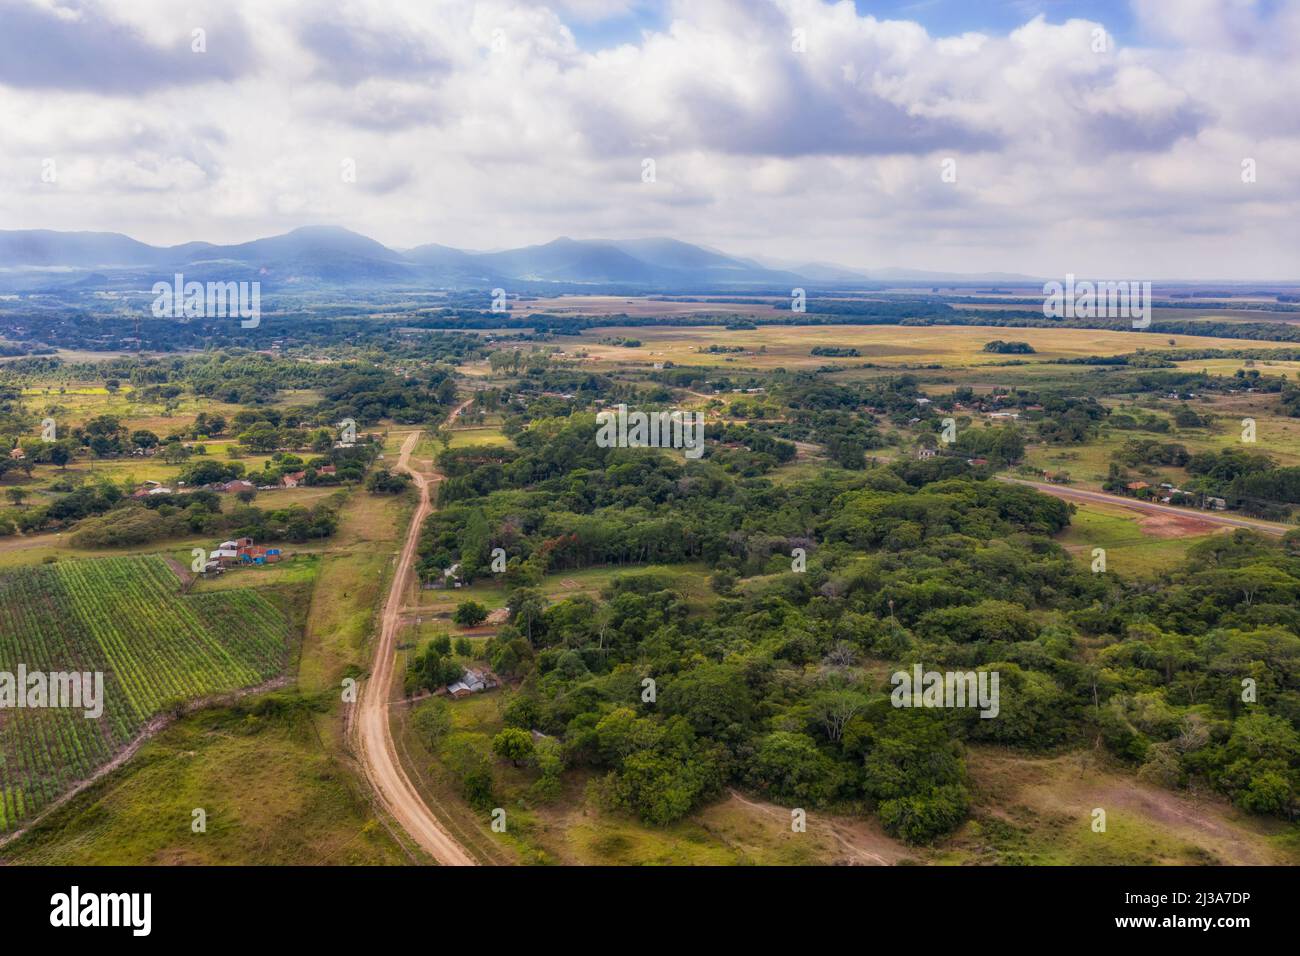 Aerial view in Paraguay with a view of the Ybytyruzu Mountains lying in the fog. Stock Photo